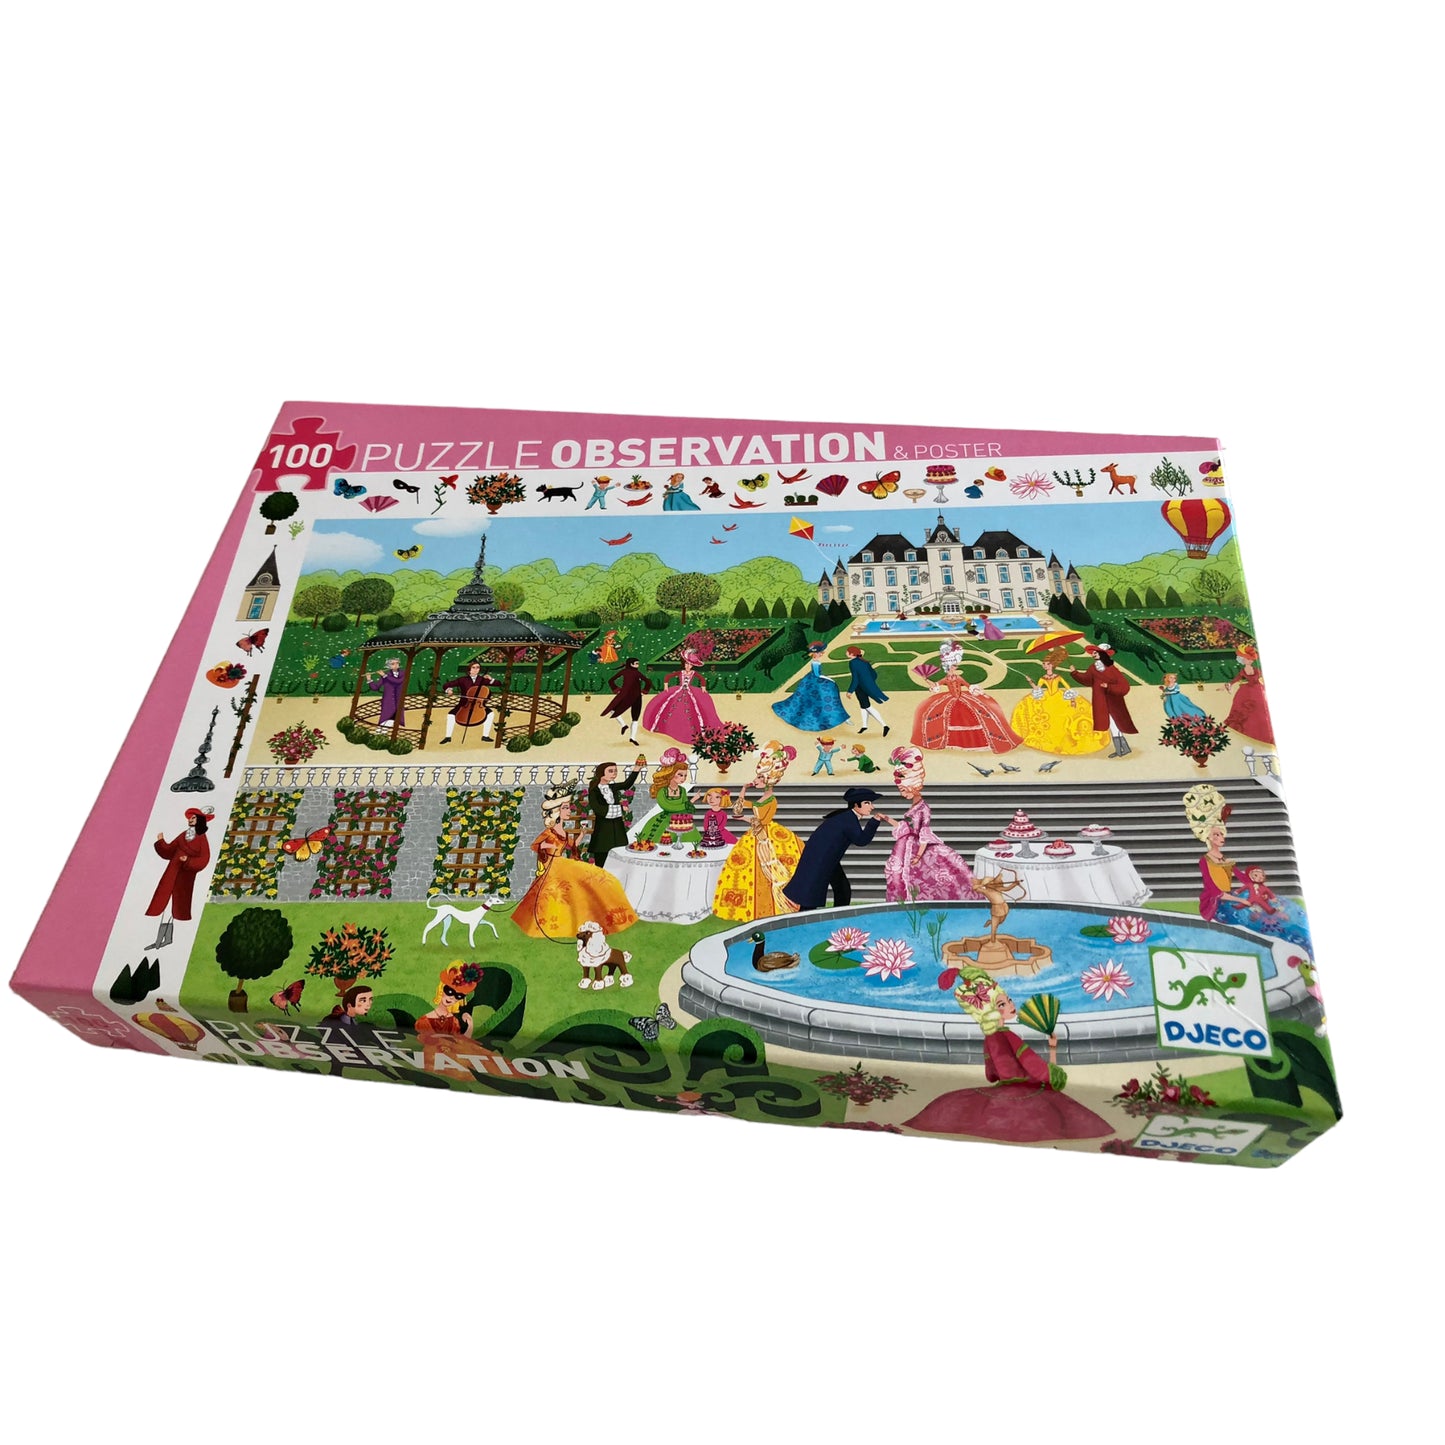 Djeco - "Garden Party" Puzzle Observation & Poster - 100 Pieces